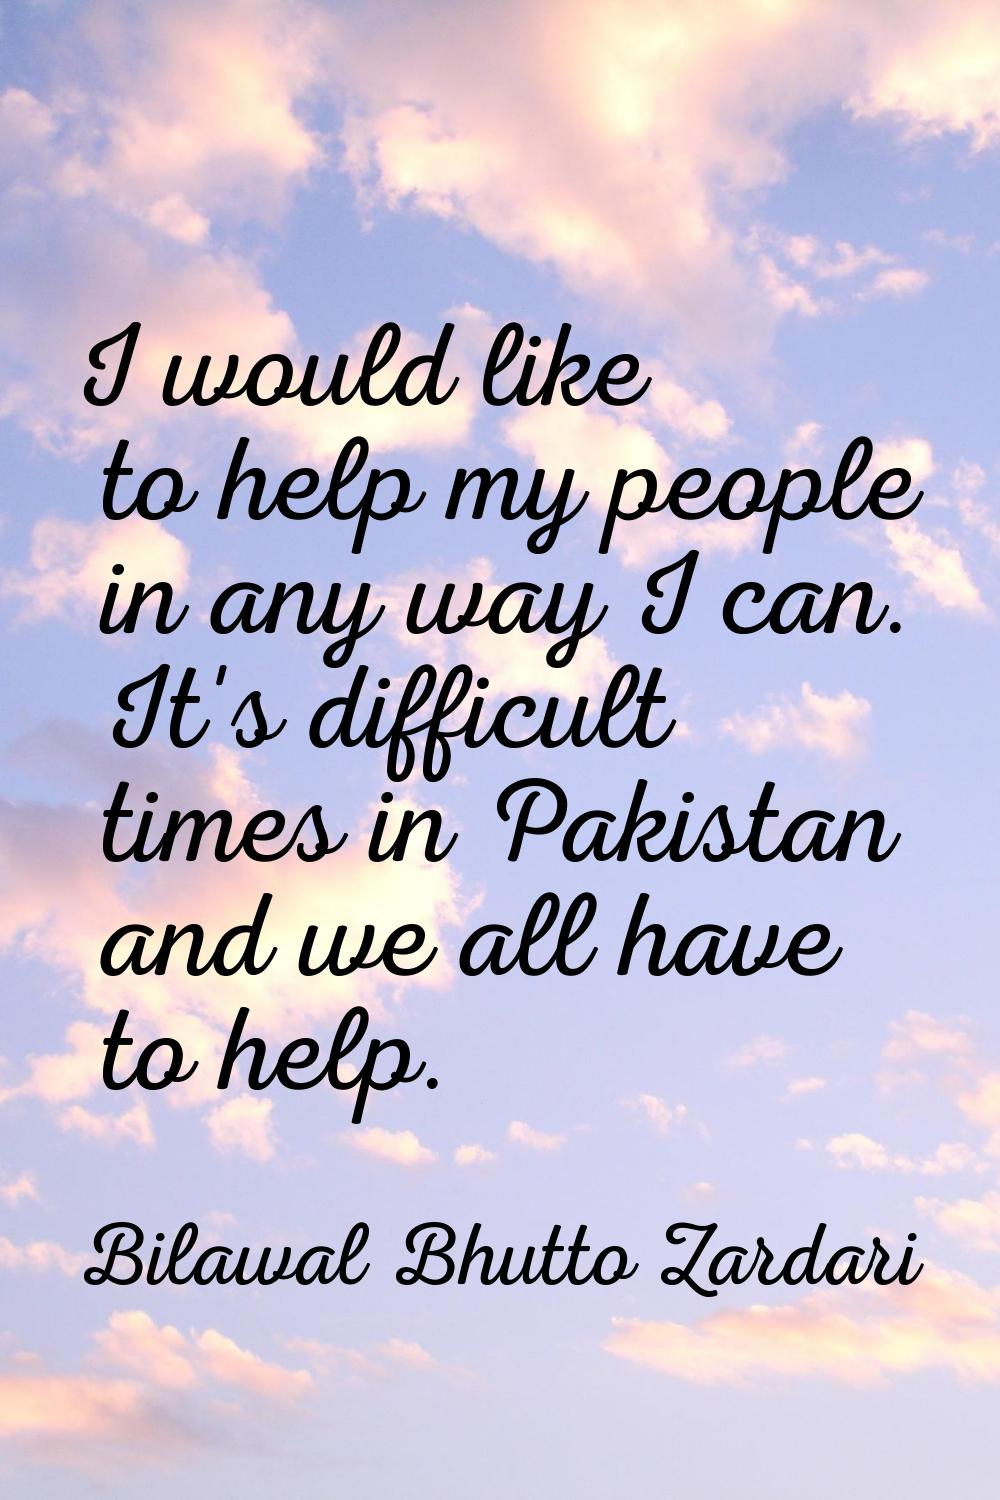 I would like to help my people in any way I can. It's difficult times in Pakistan and we all have t